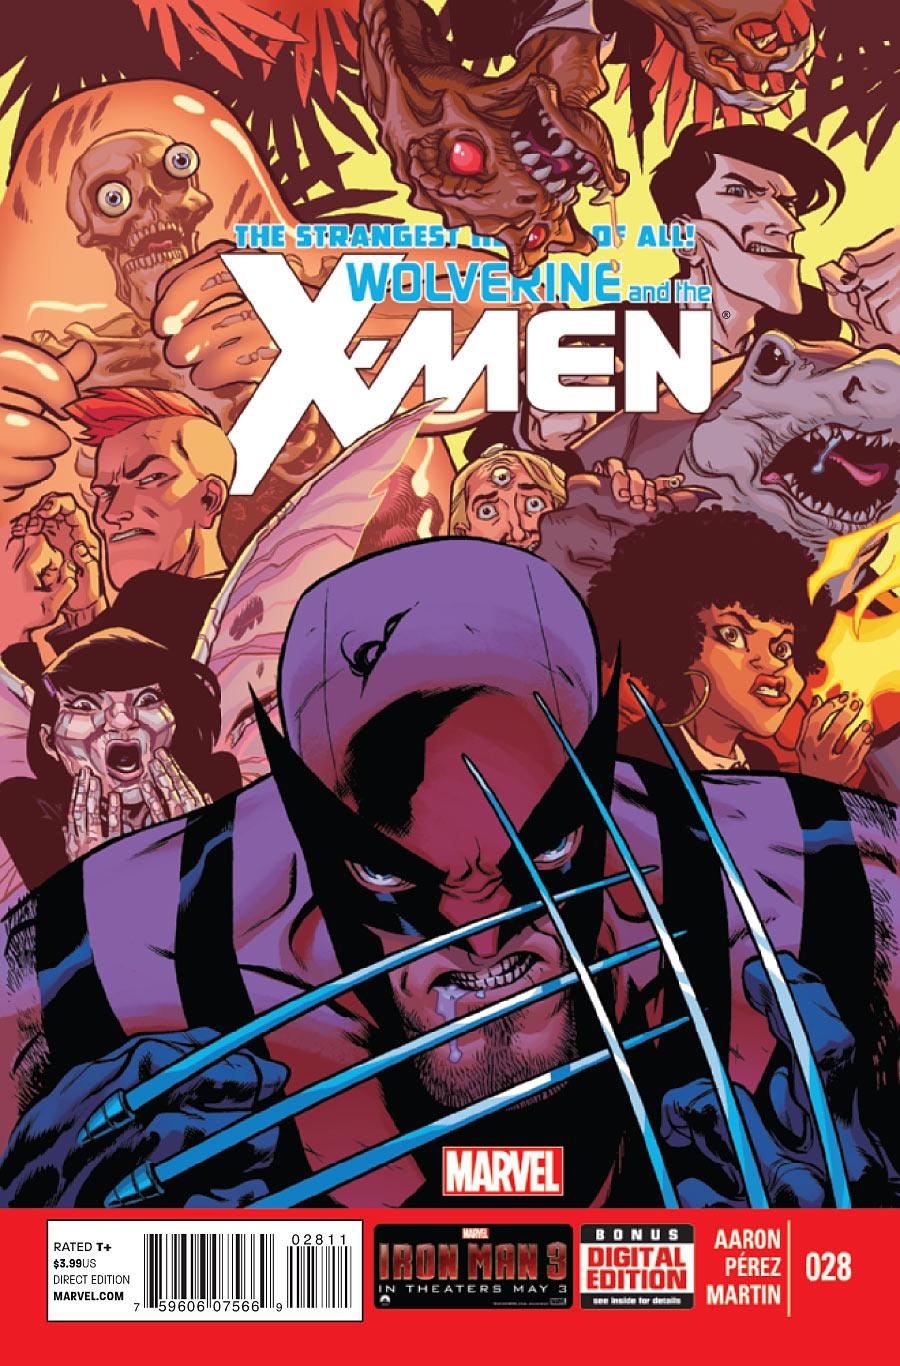 Wolverine and the X-Men Vol. 1 #28